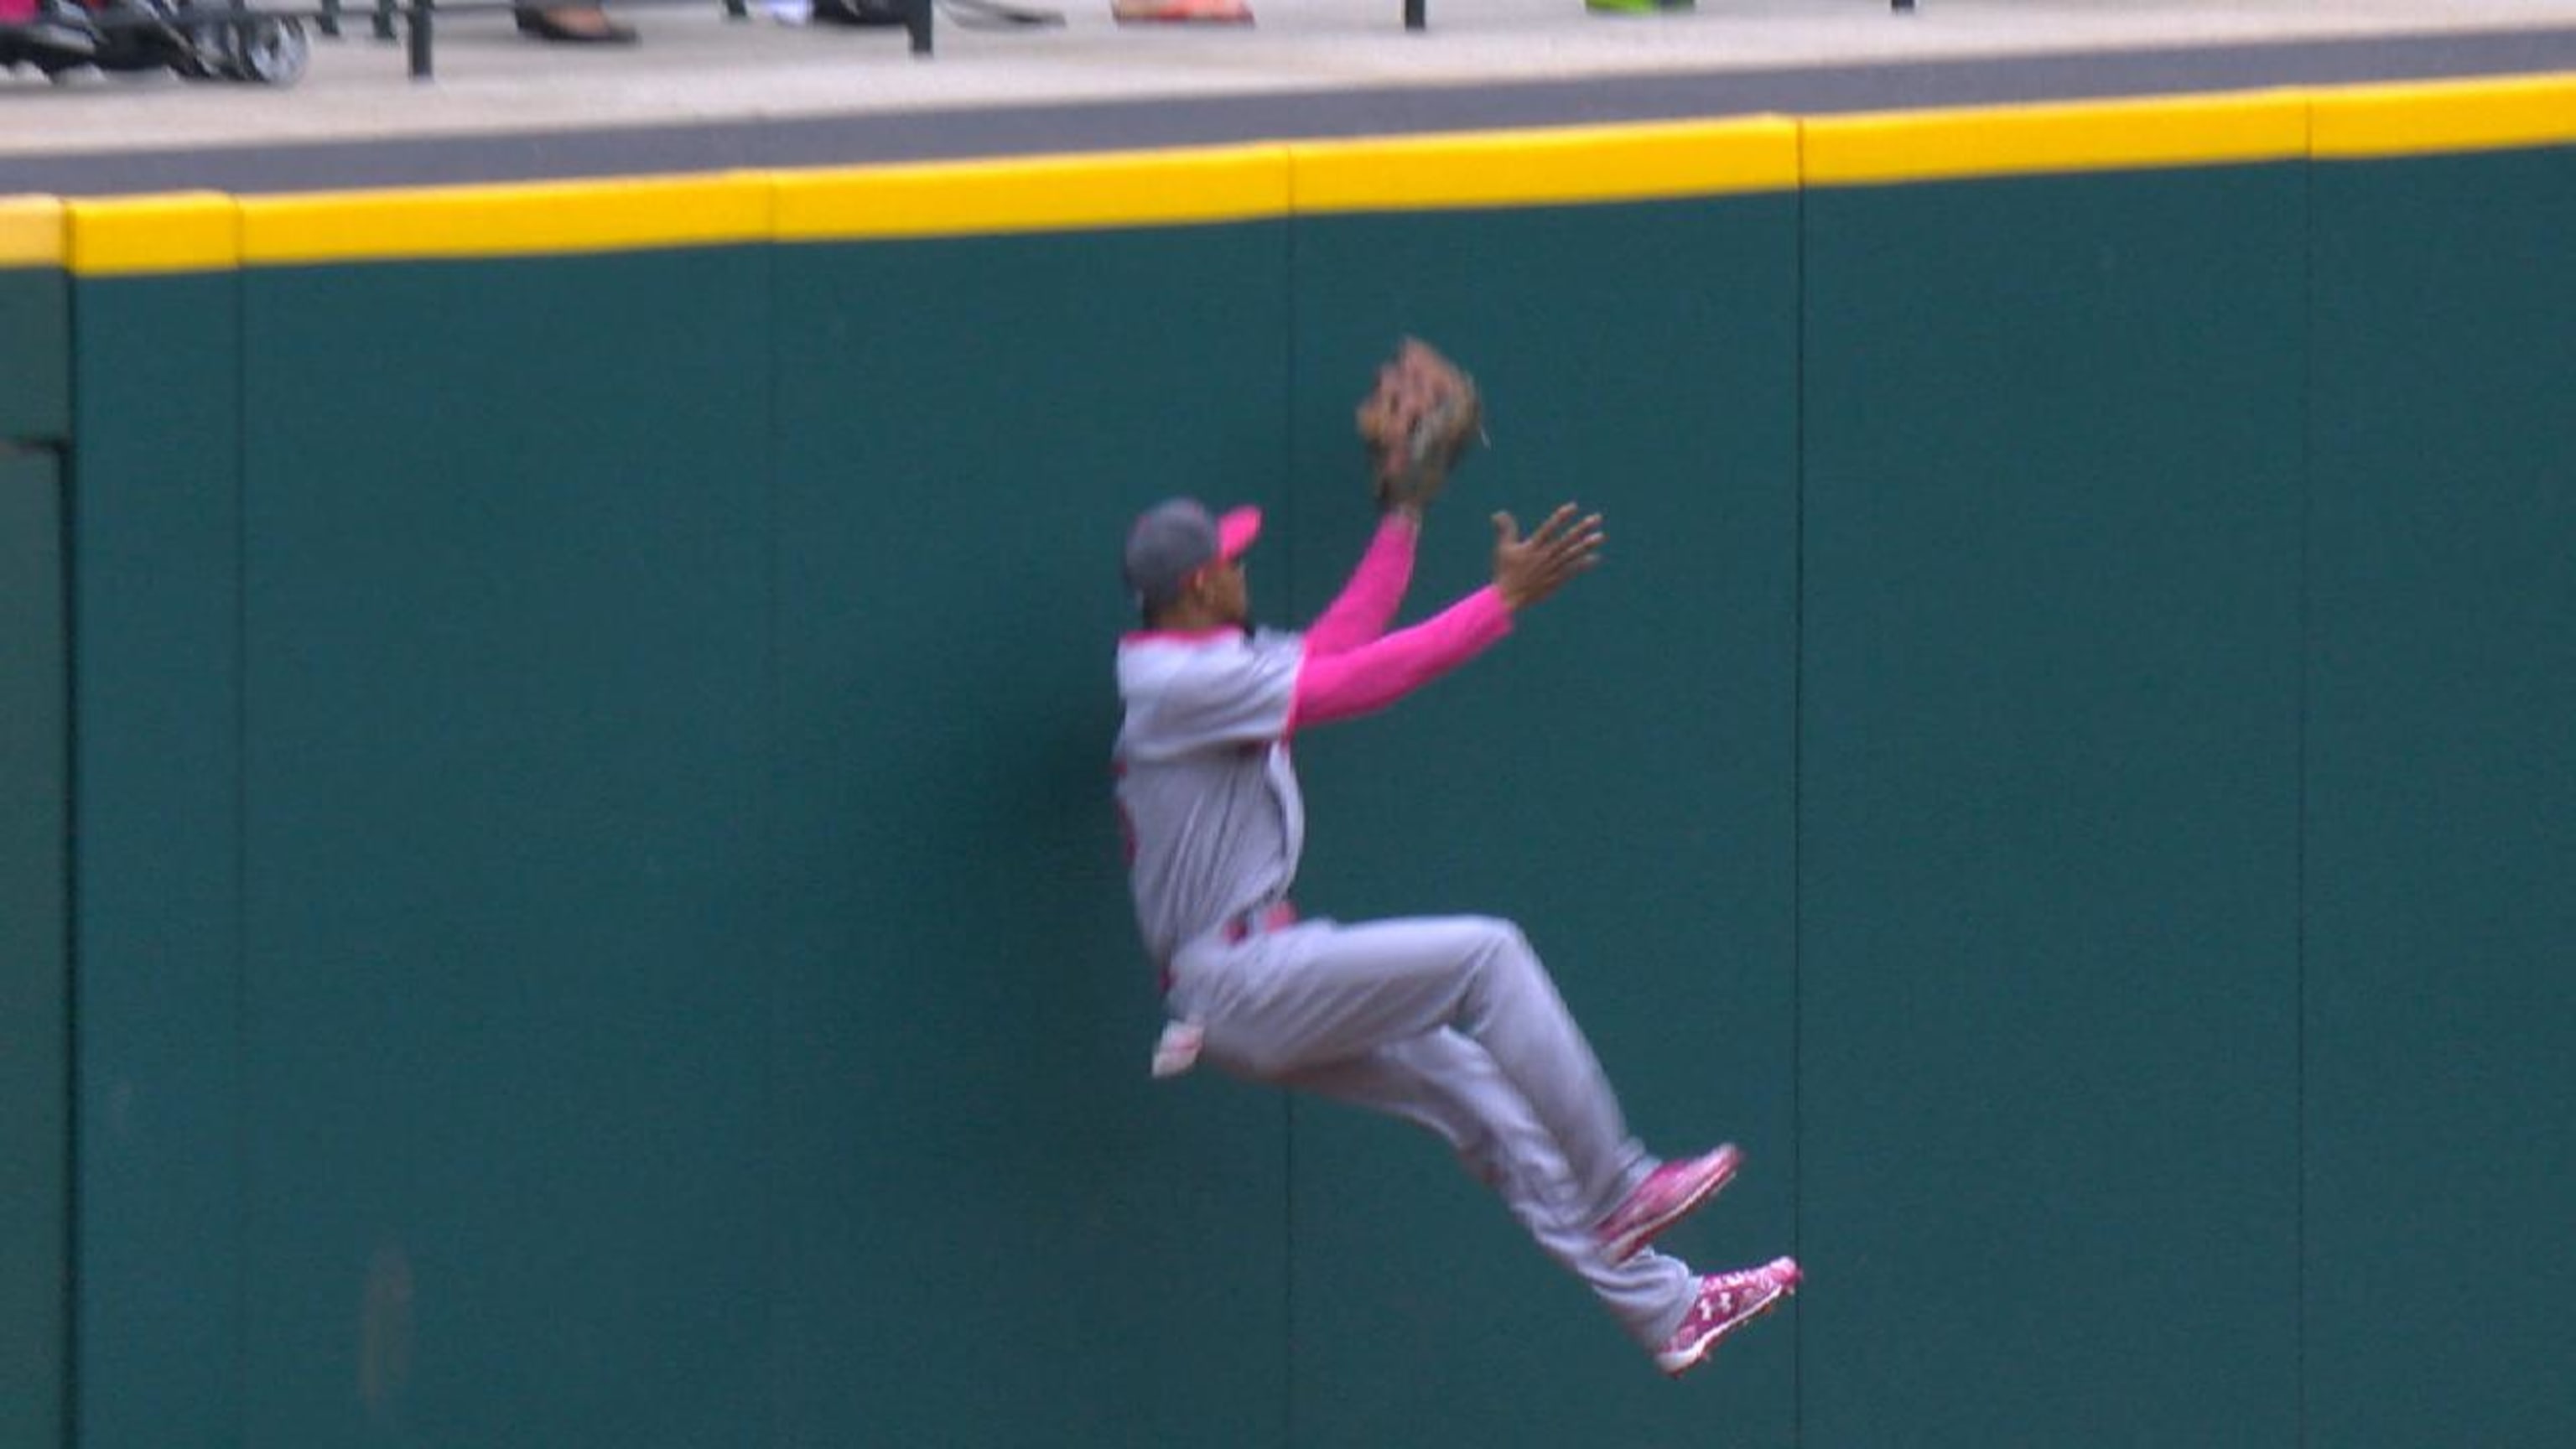 Byron Buxton showed no regard for the wall as he made this insane leaping  catch